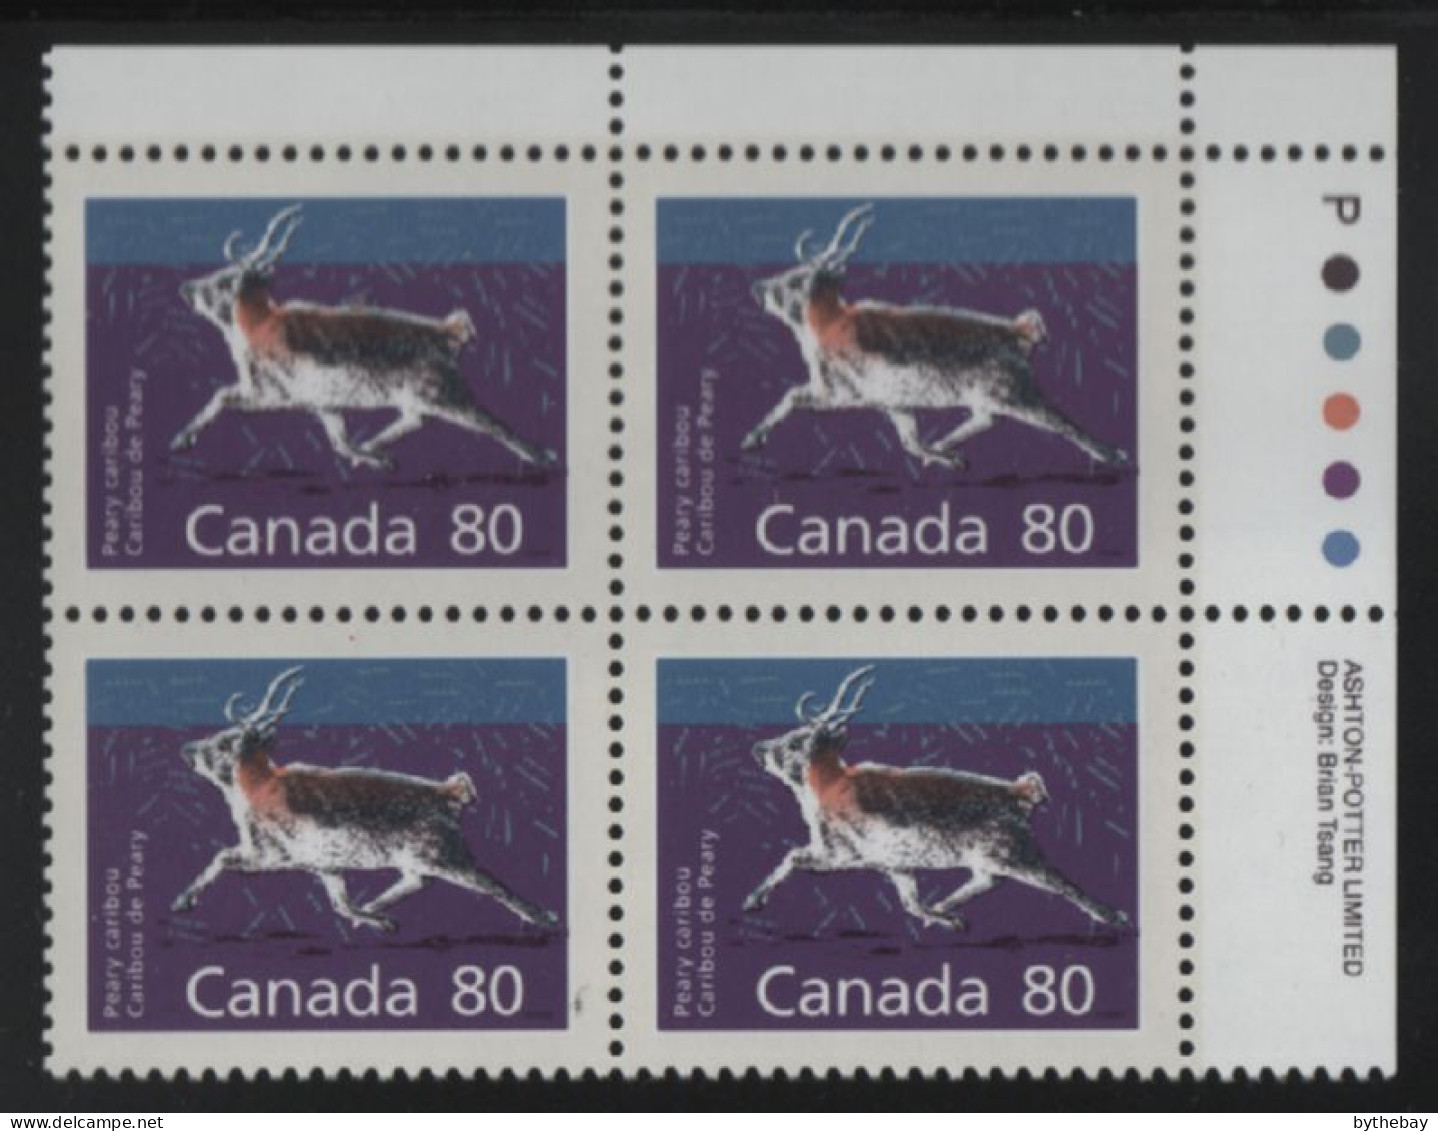 Canada 1988-92 MNH Sc 1180 Peary Caribou UR Plate Block - Num. Planches & Inscriptions Marge